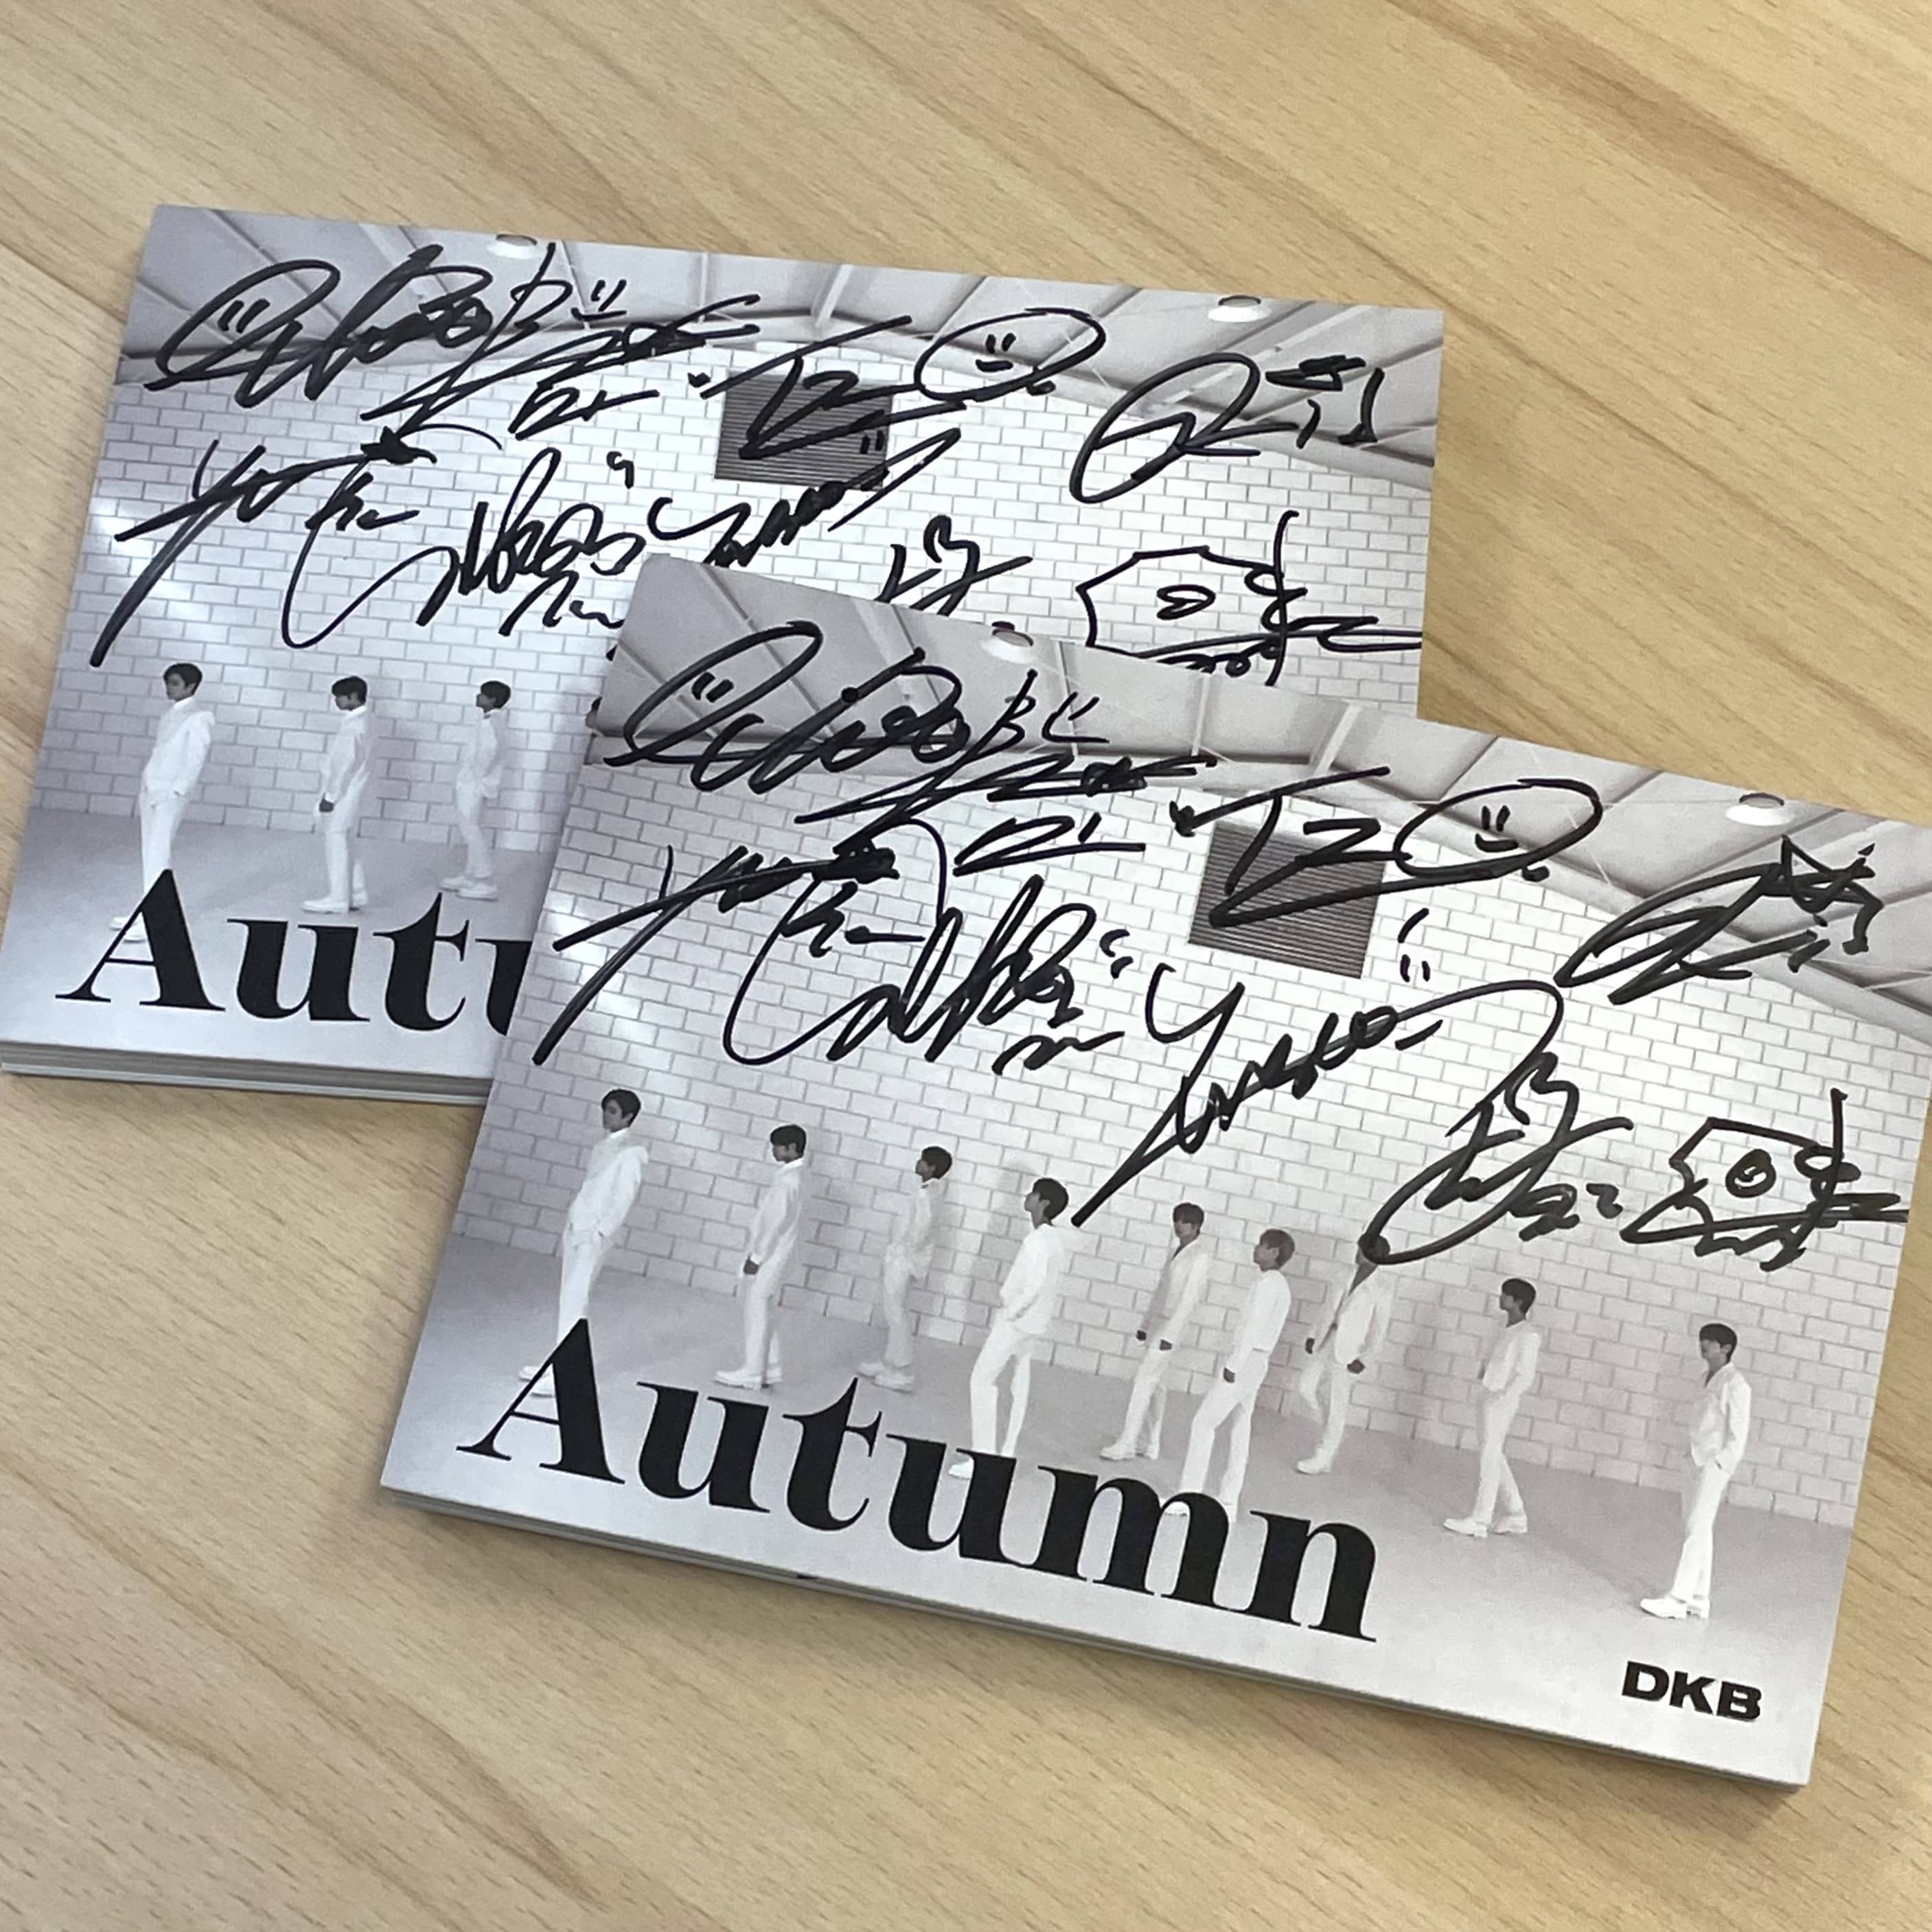 Danmee the SPECIAL EVENT- DKB「Autumn」直筆サイン入りCDプレゼント